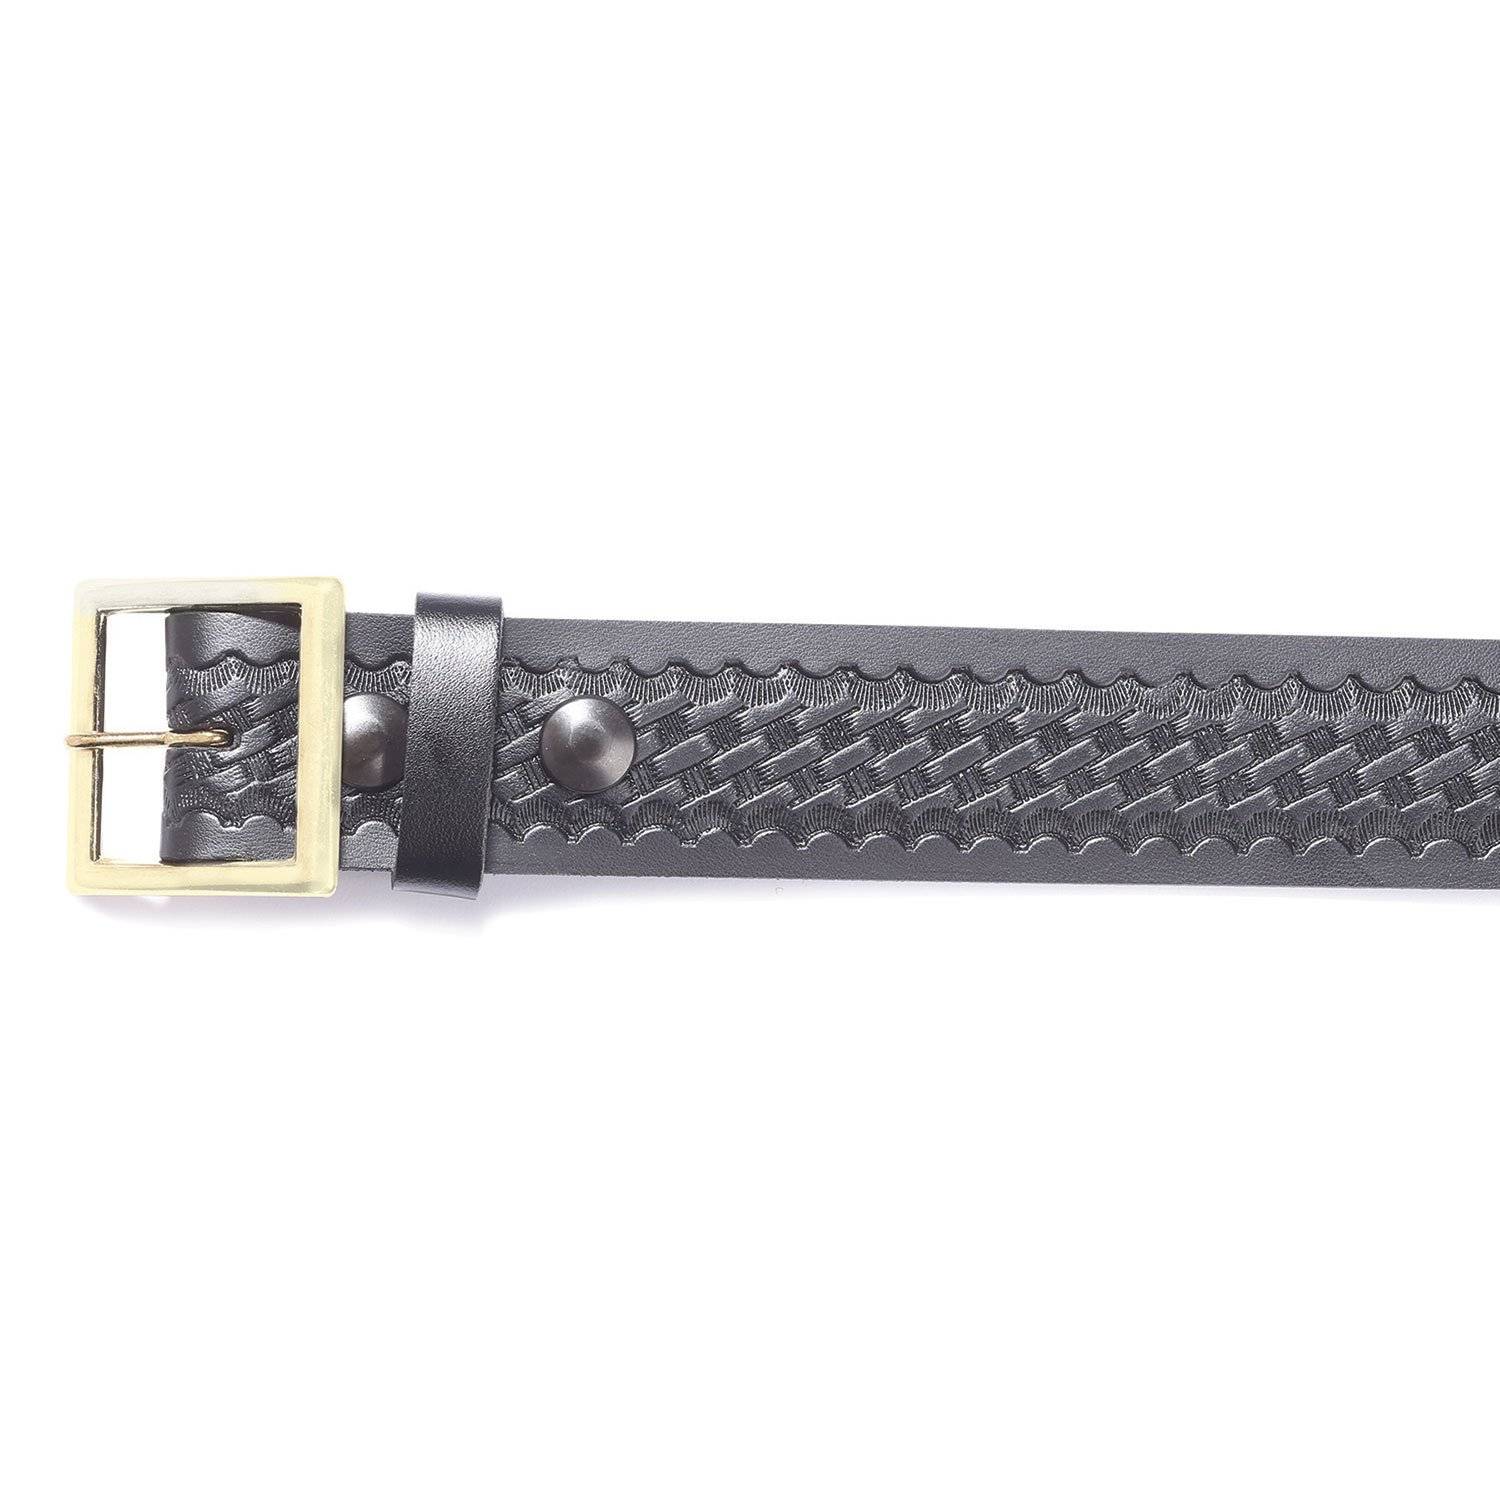 Boston Leather 1.75 Double Wide Belt Keeper with VELCRO Closure